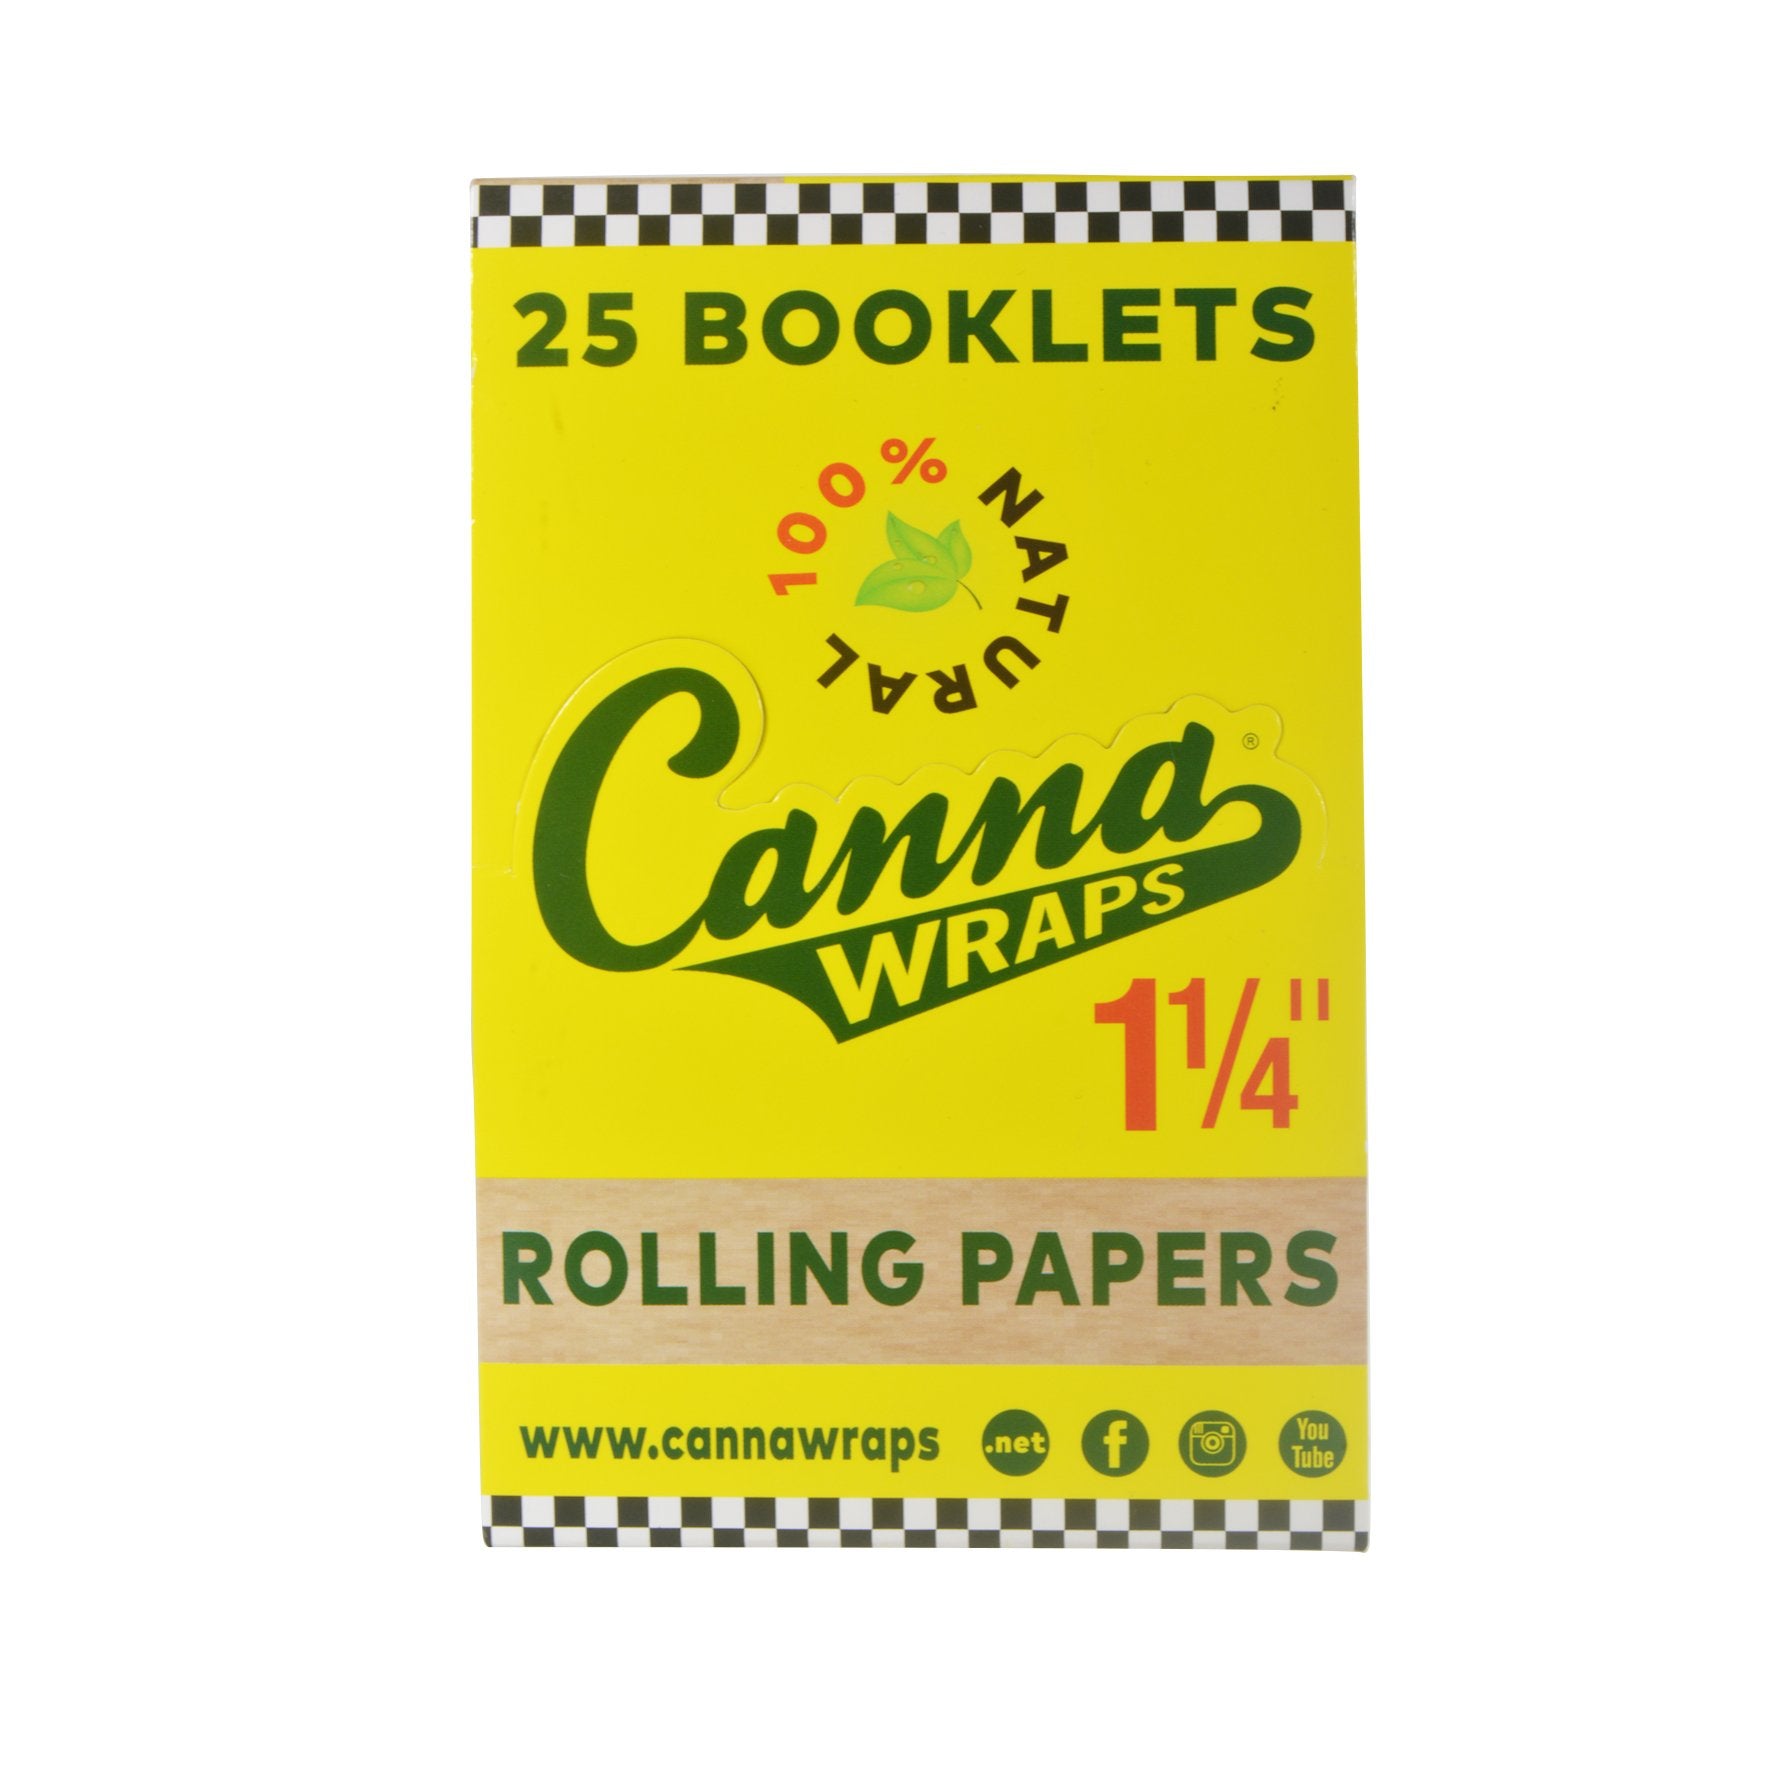 CANNA WRAPS | 'Retail Display' 1 1/4 Size Natural Rolling Papers | 83mm - Ultra Fine - 25 Count - 2